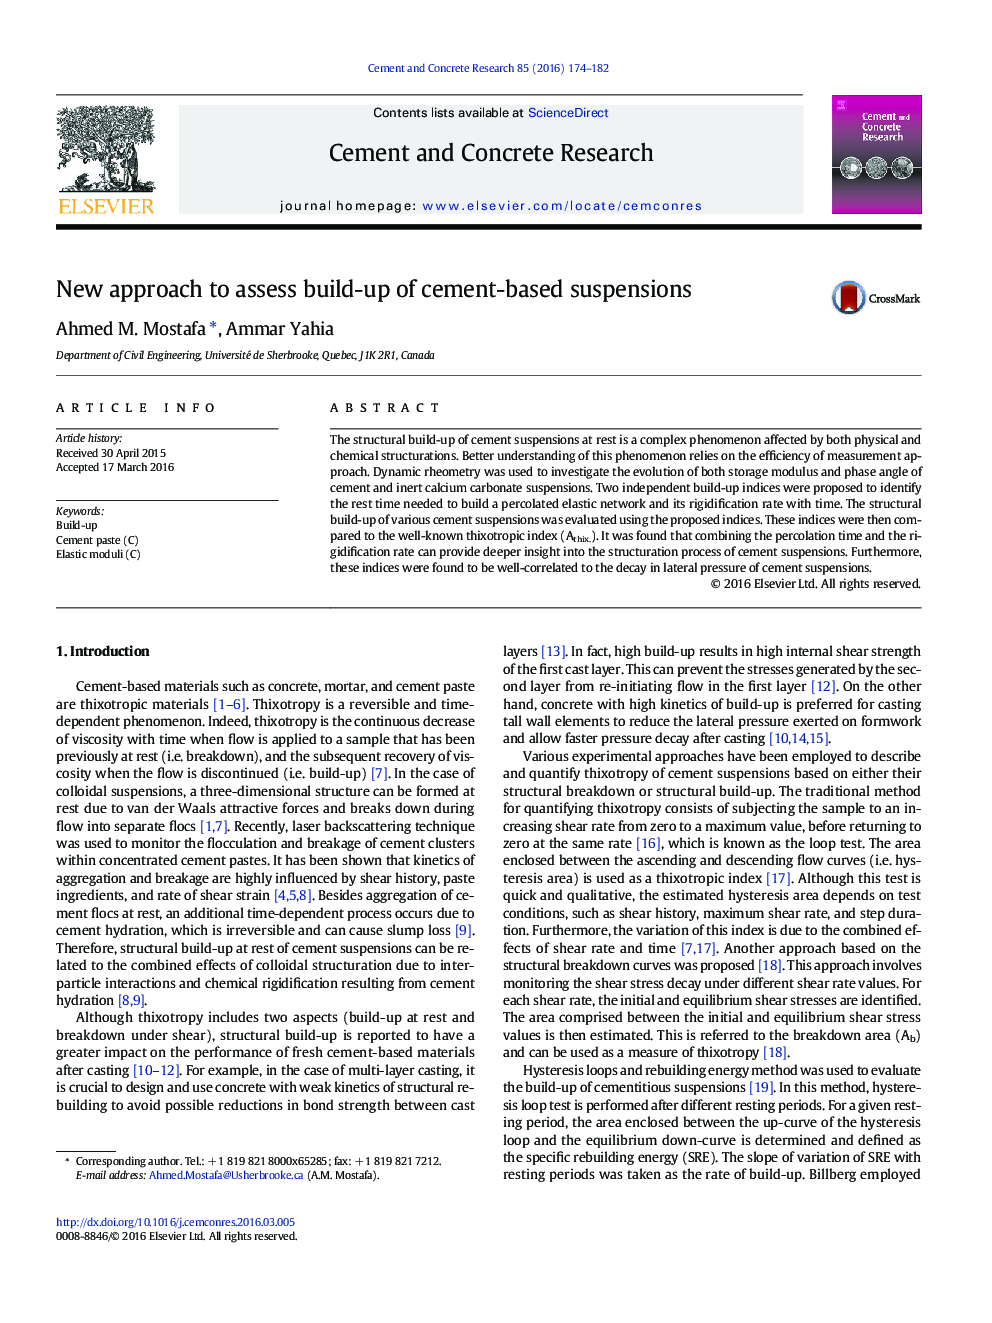 New approach to assess build-up of cement-based suspensions